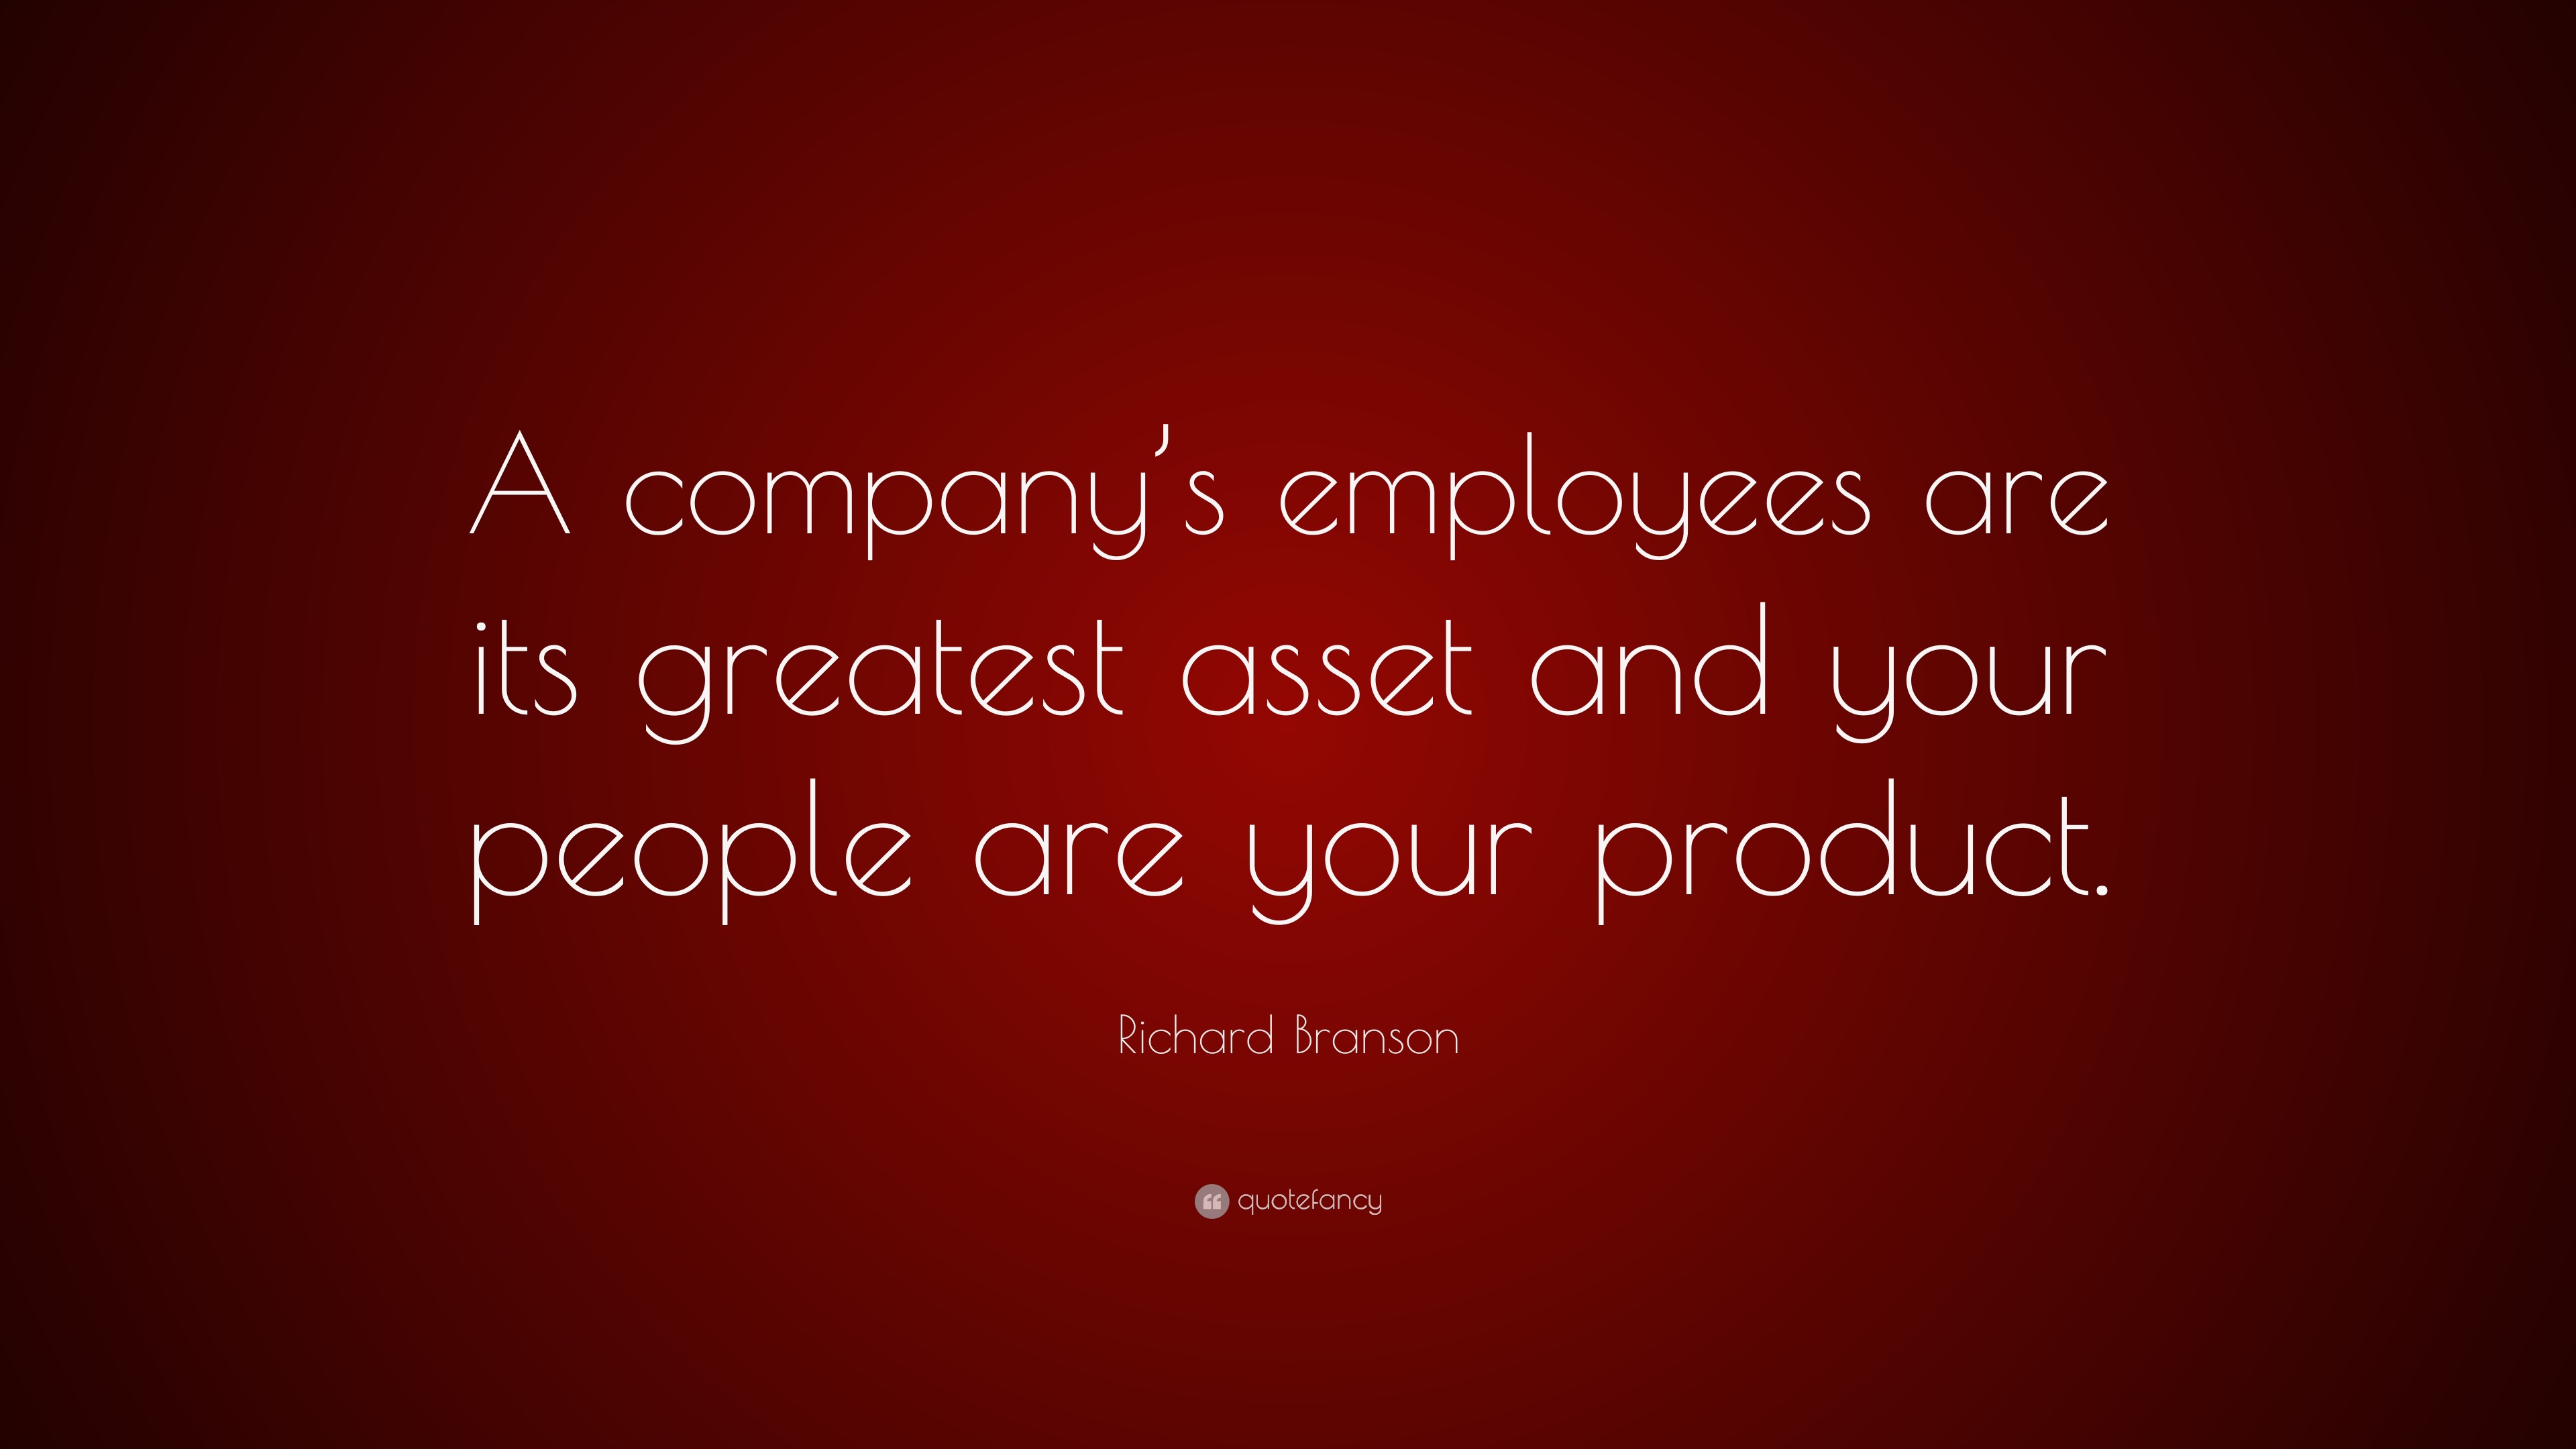 Richard Branson Quote: “A company’s employees are its greatest asset